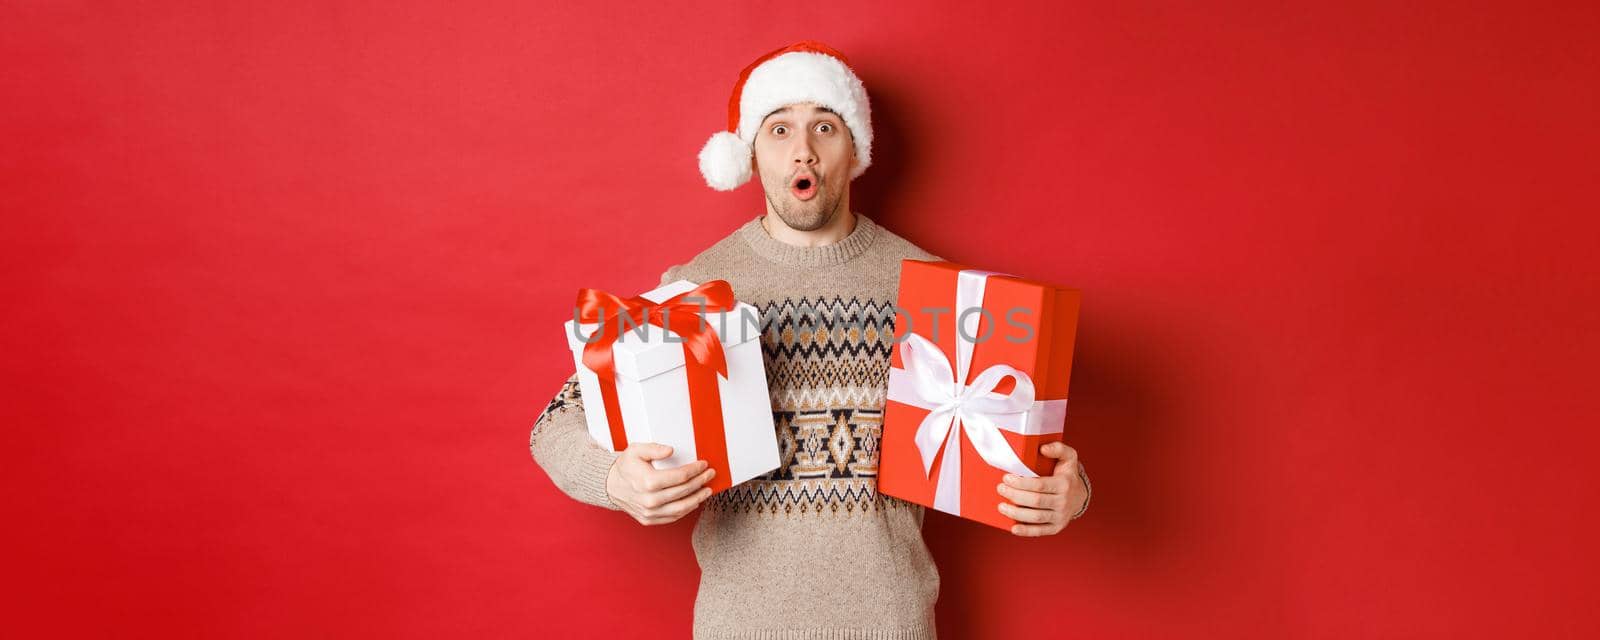 Concept of winter holidays, new year and celebration. Image of surprised attractive guy in santa hat and christmas sweater, receiving gifts, holding presents and looking amazed.